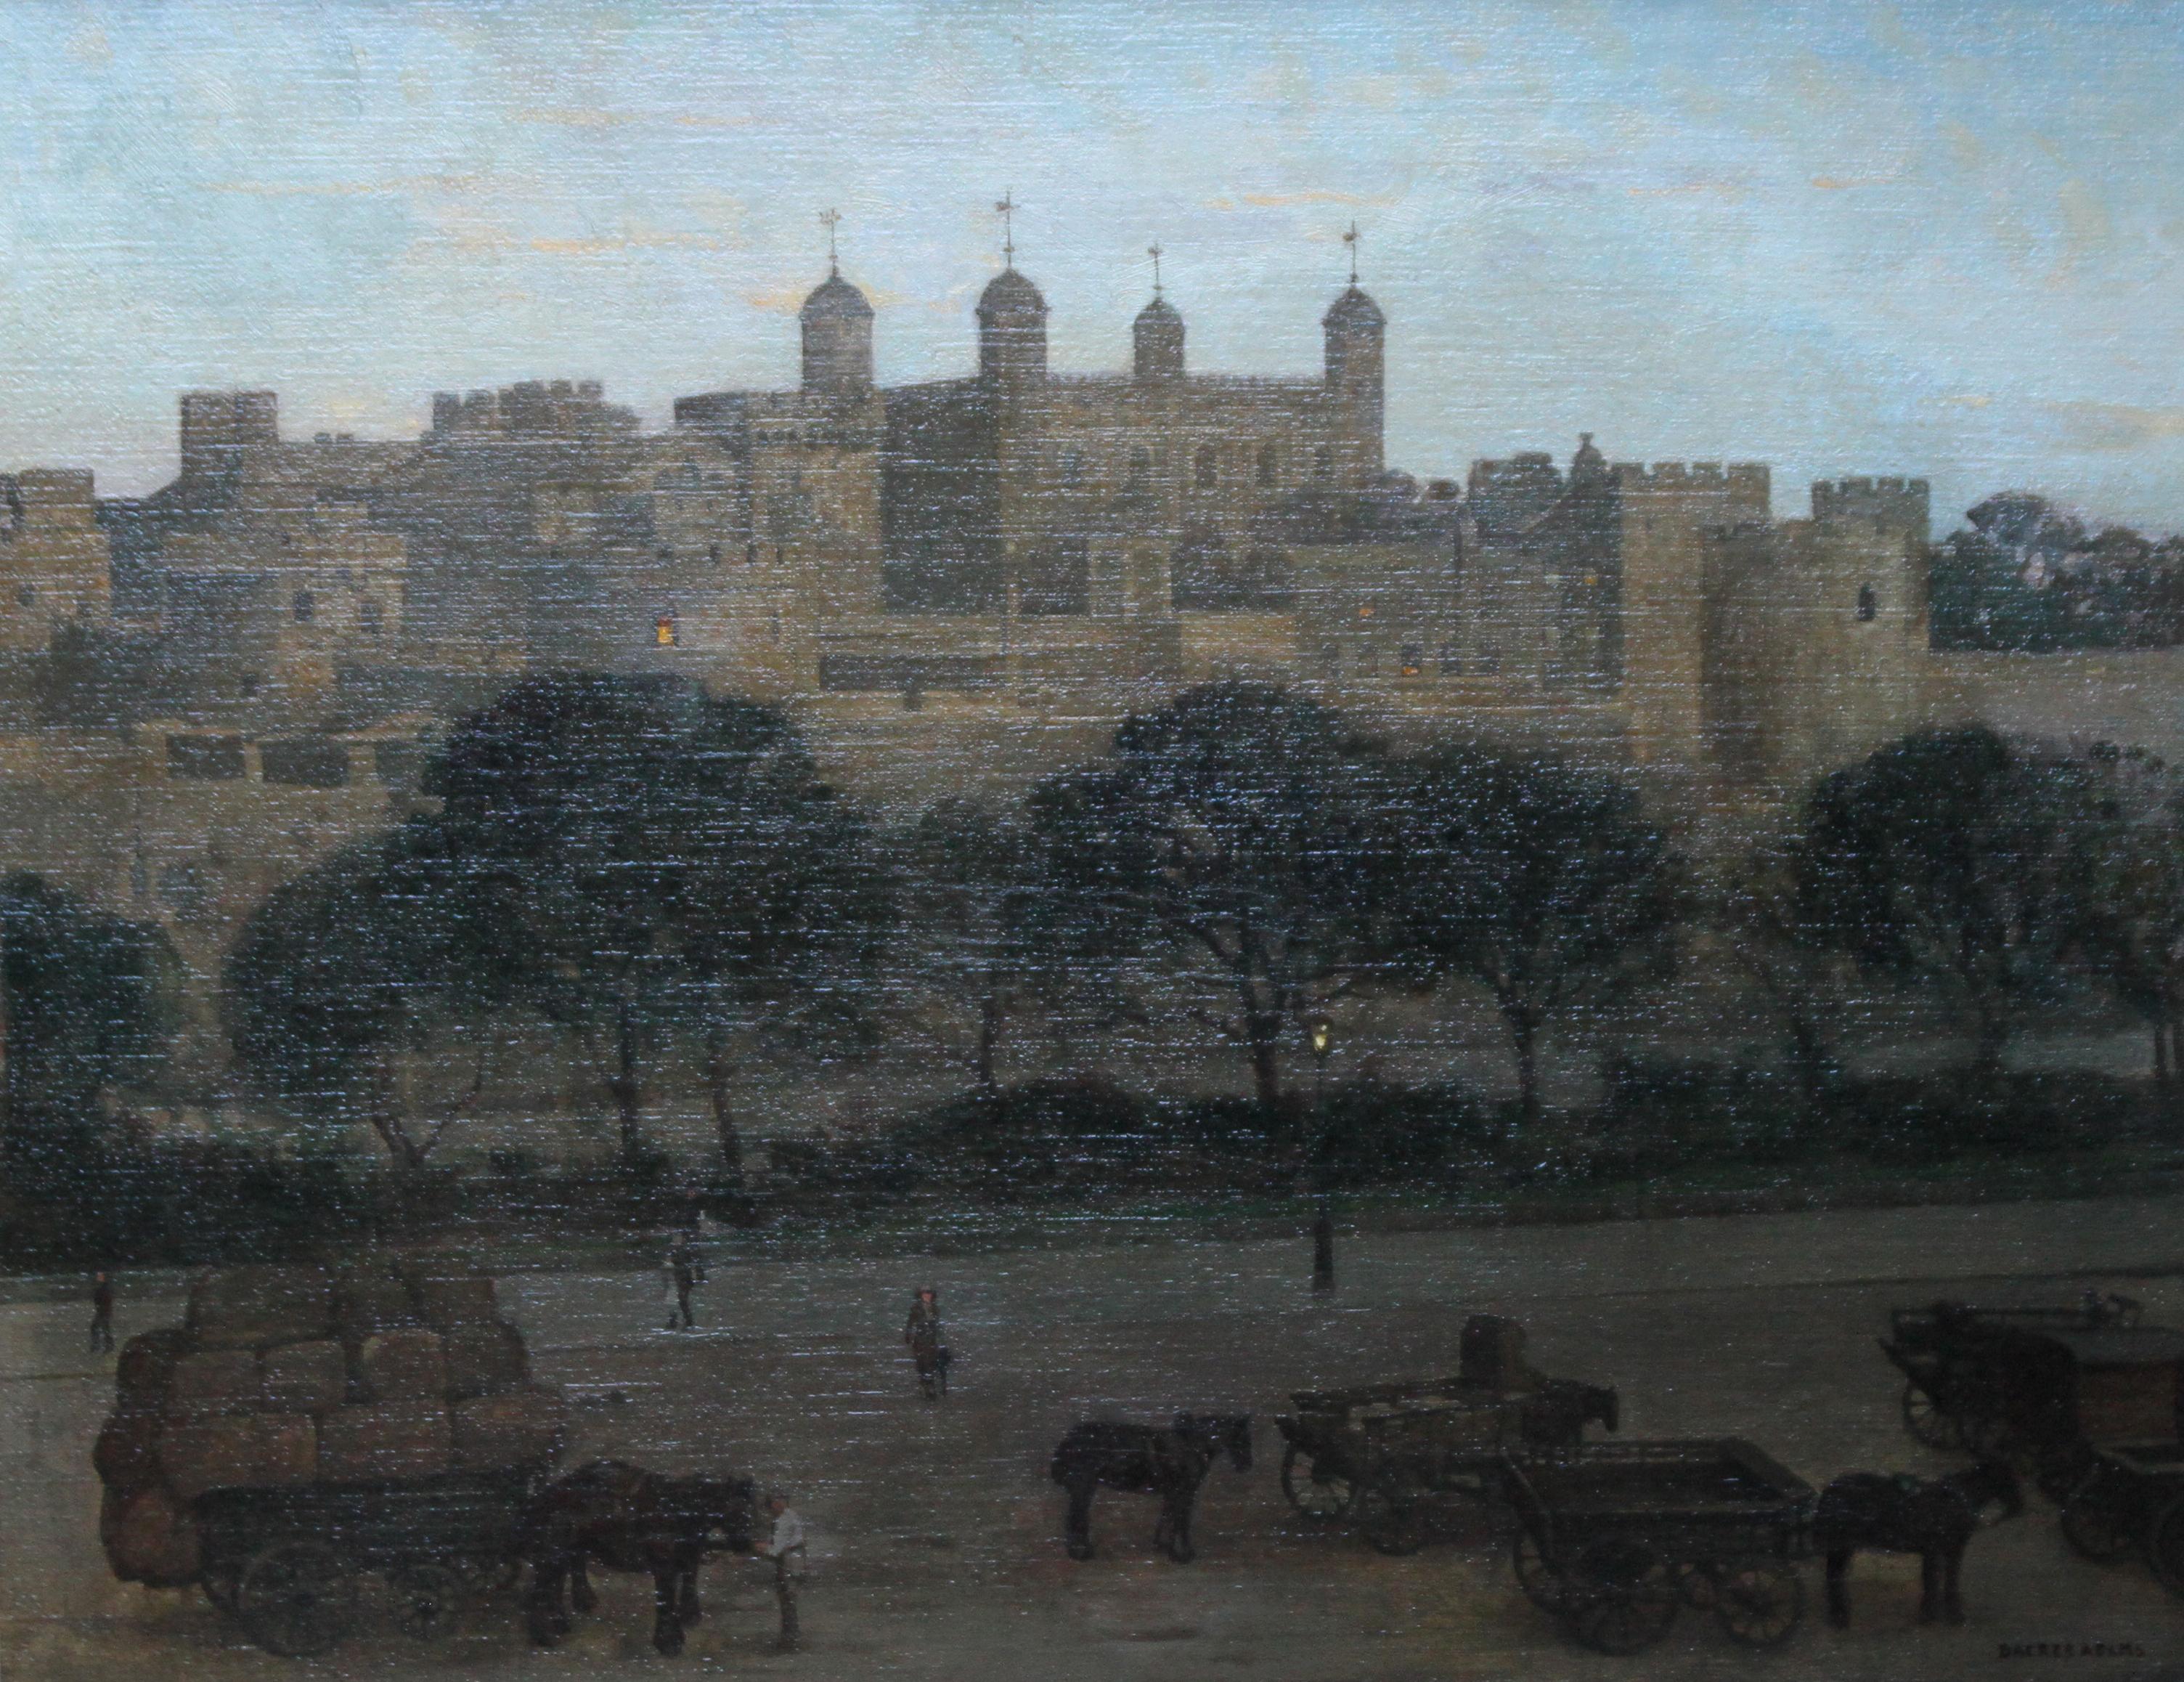 The Tower of London - British 20's art nocturne city landscape oil painting - Painting by William Dacres Adams